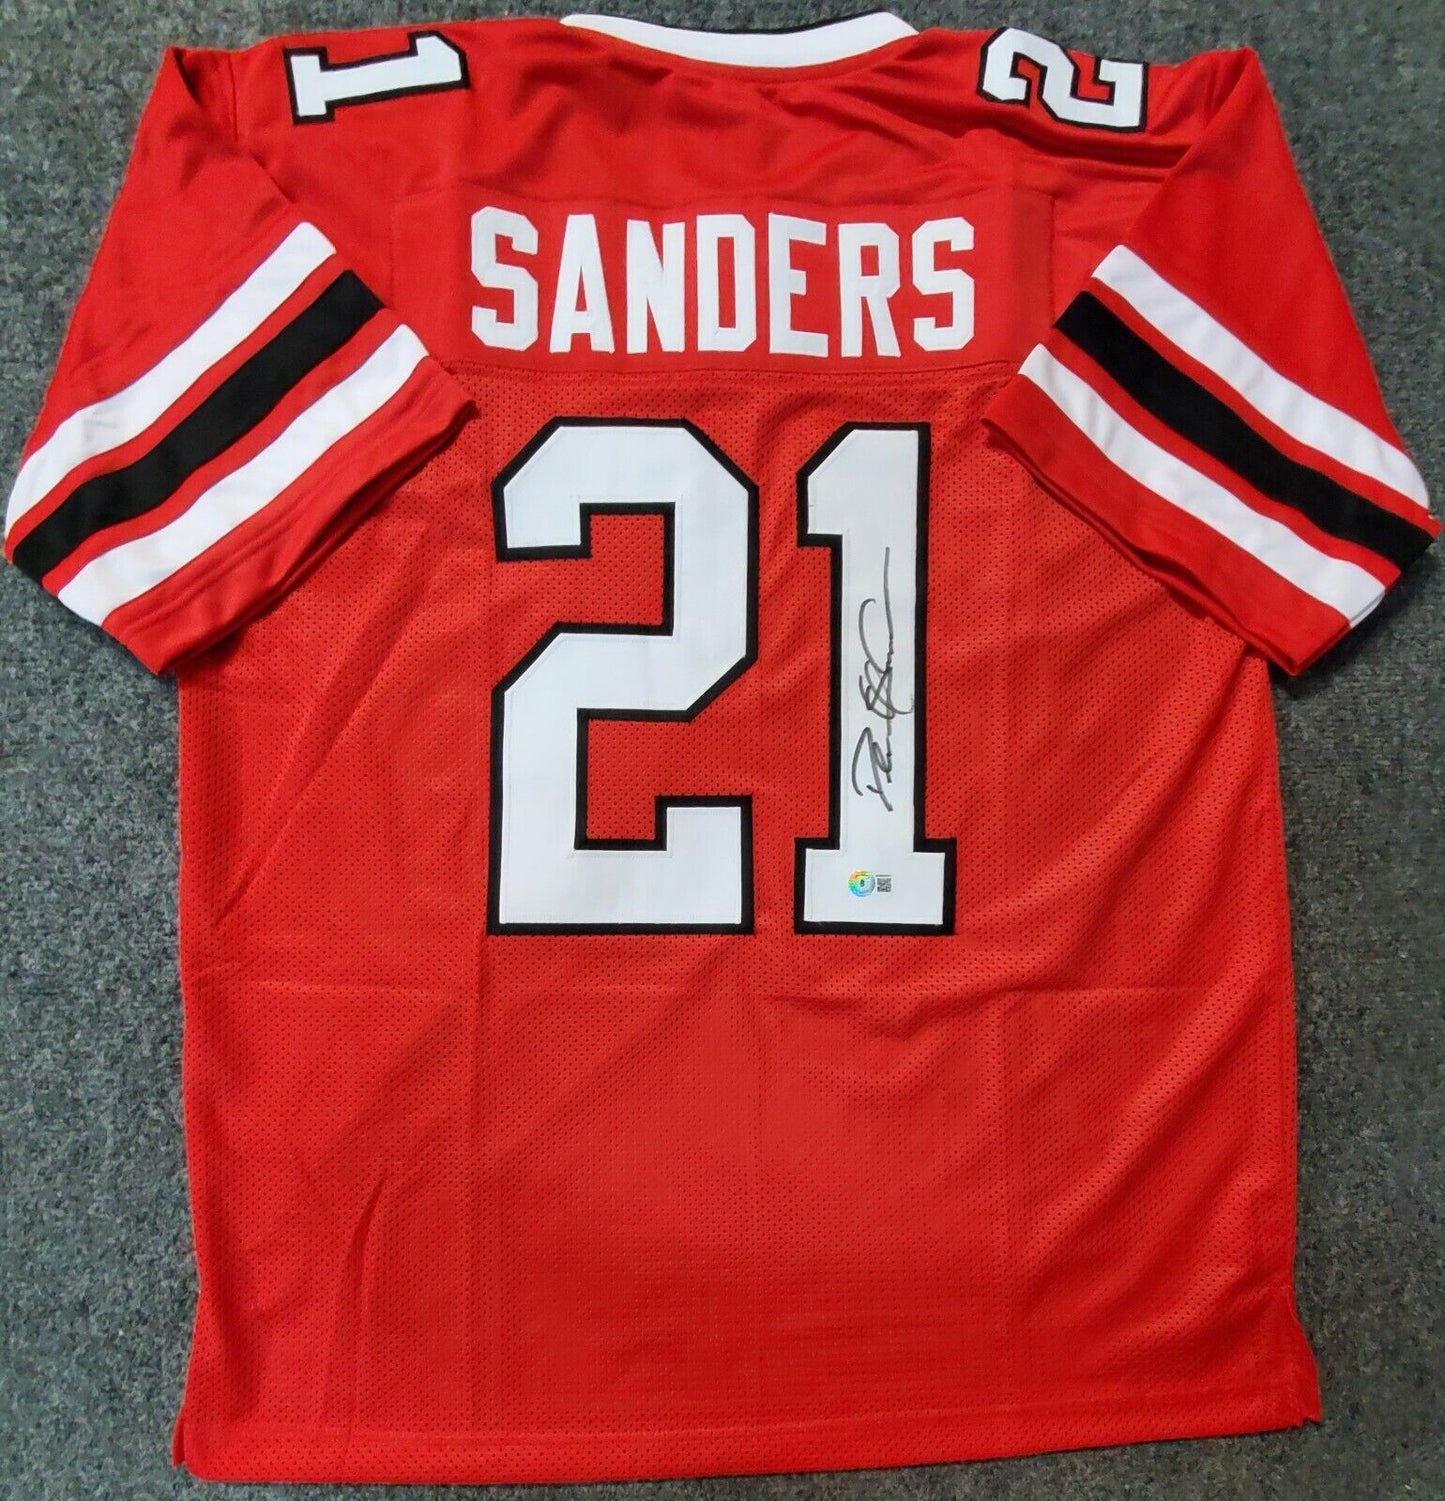 Deion Sanders Autographed and Framed Atlanta Falcons Jersey